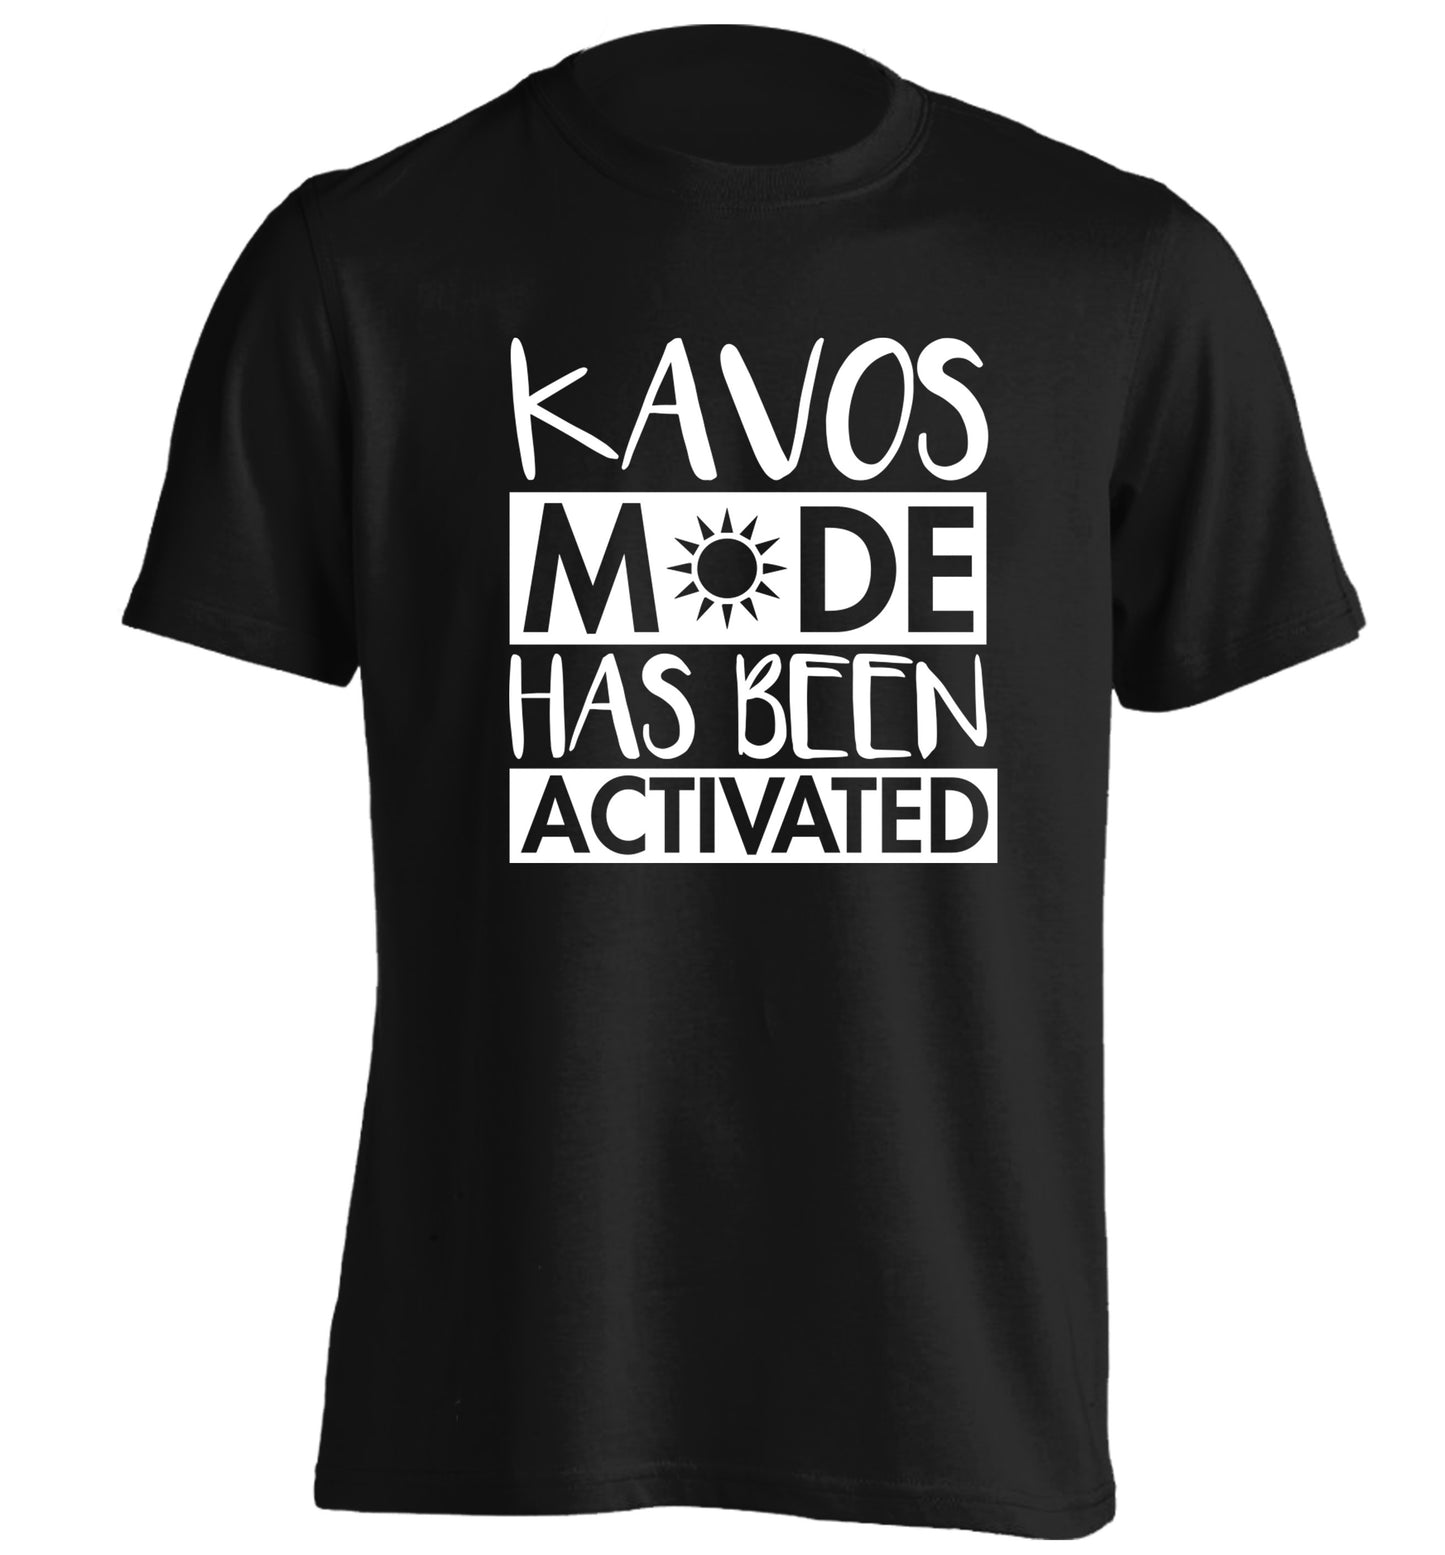 Kavos mode has been activated adults unisex black Tshirt 2XL